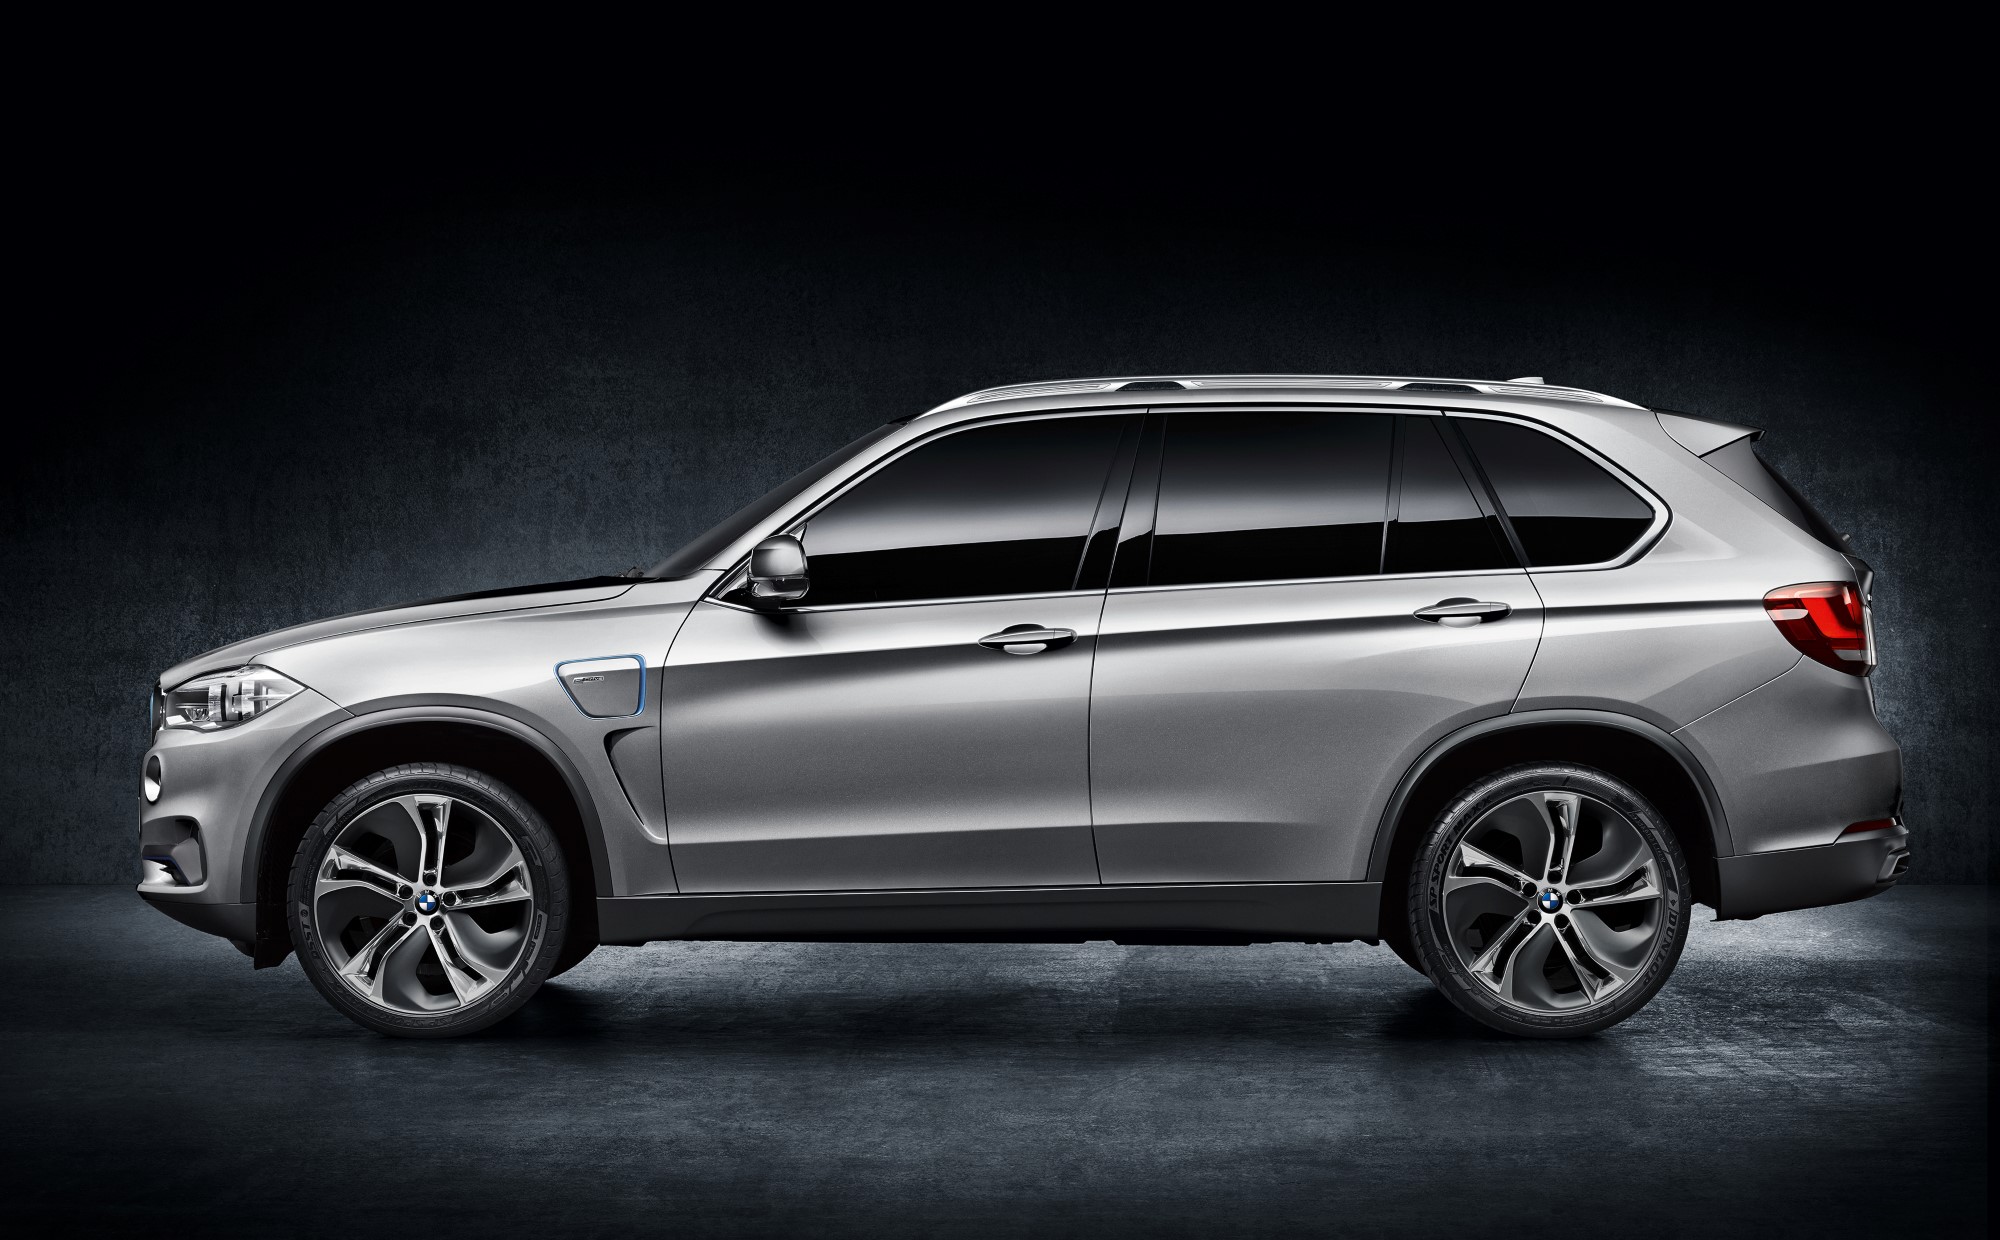 BMW Concept X5 eDrive Tries To Put The SAV On The Plug-In Hybrid Map